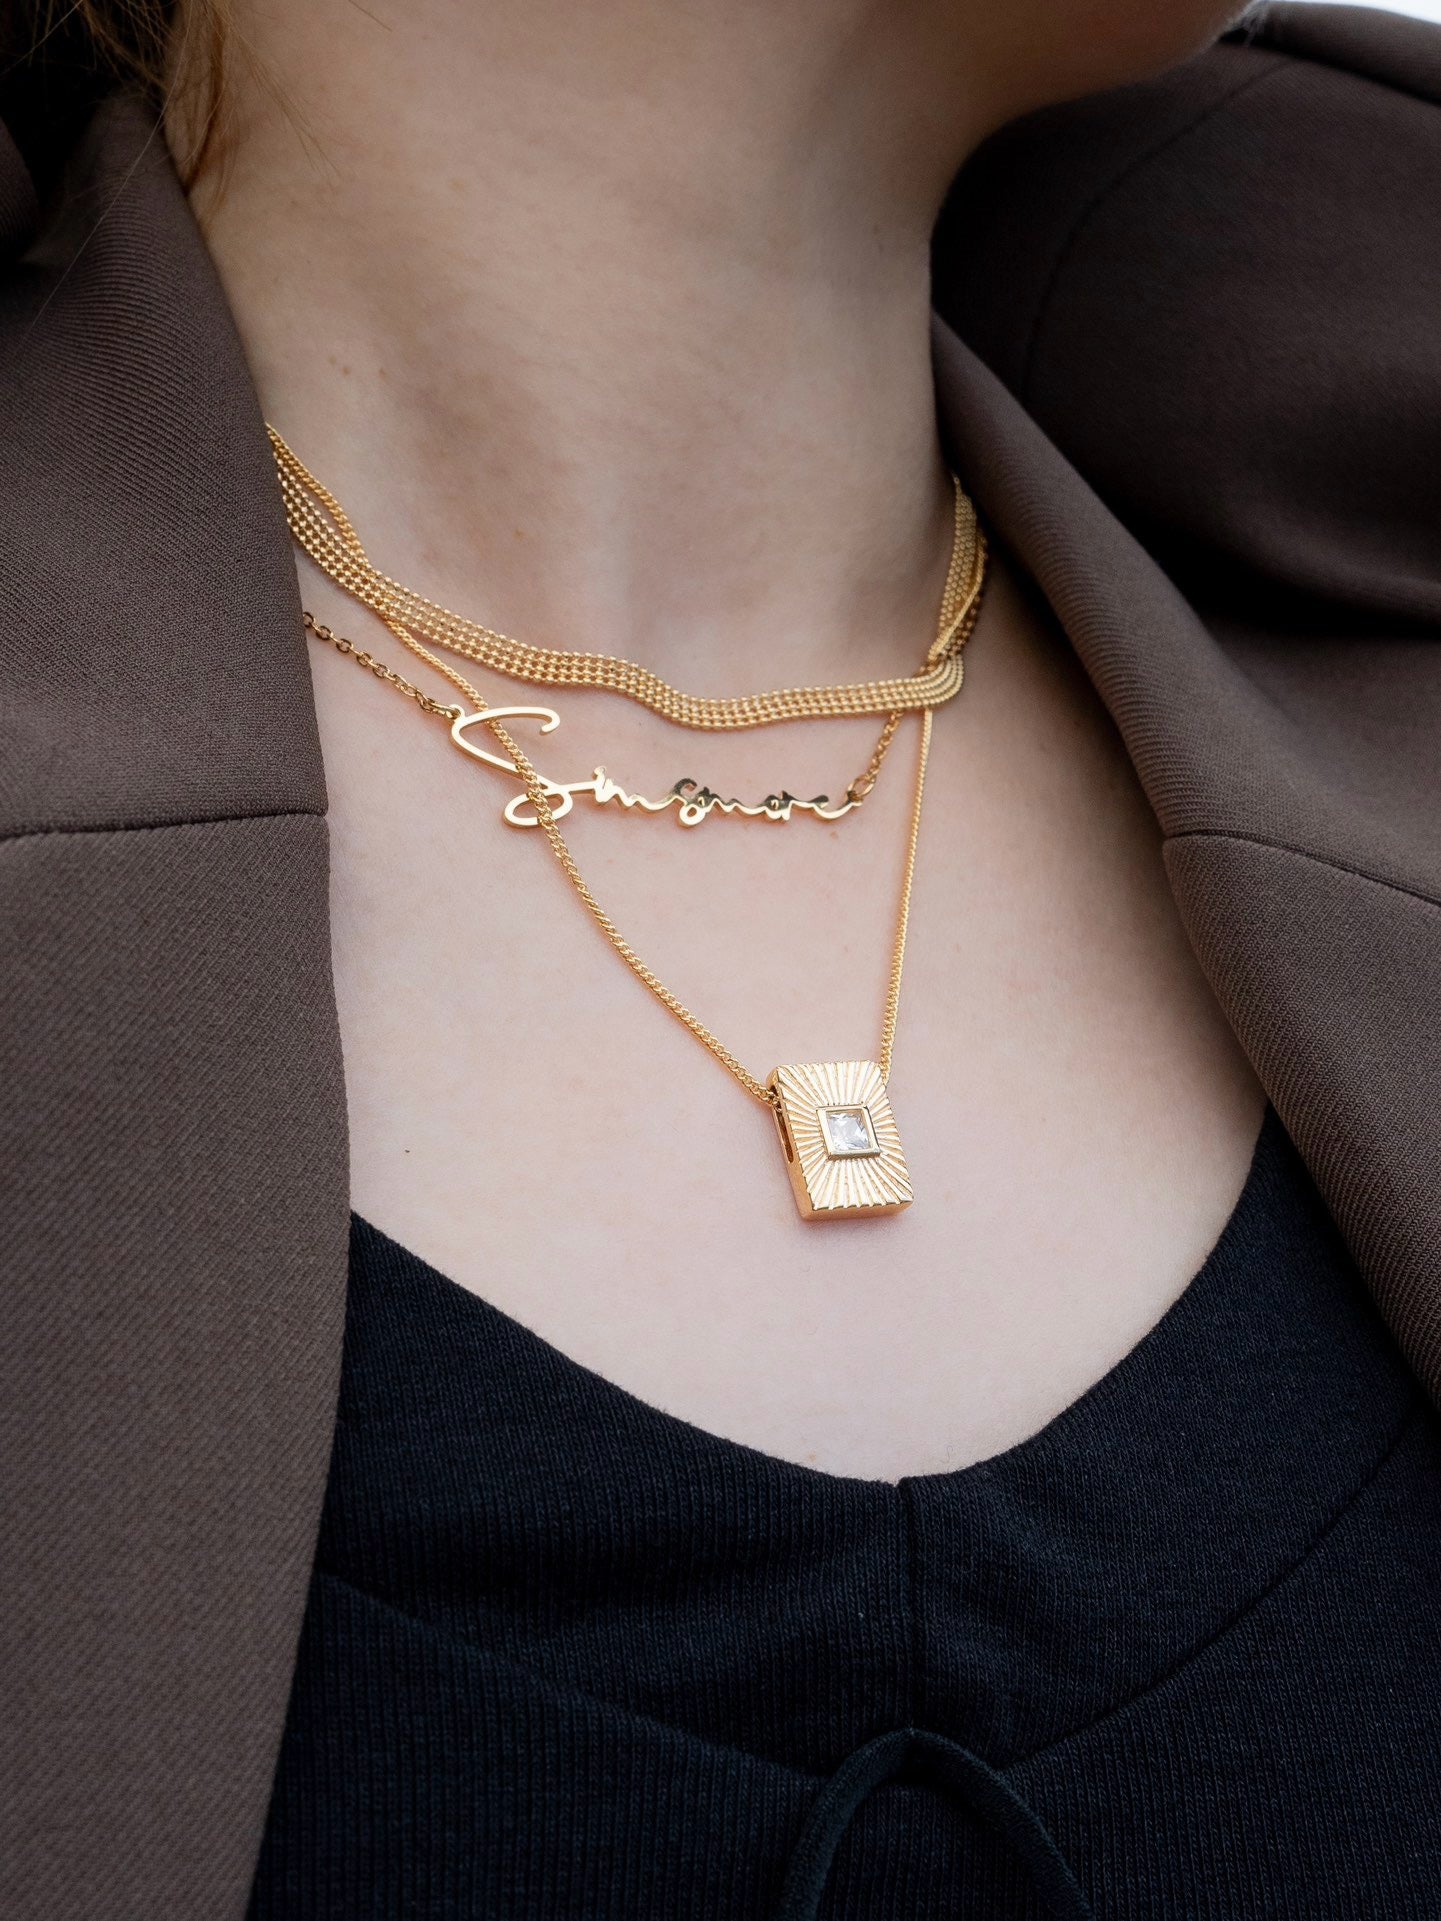 Reme Personalized Name Necklace